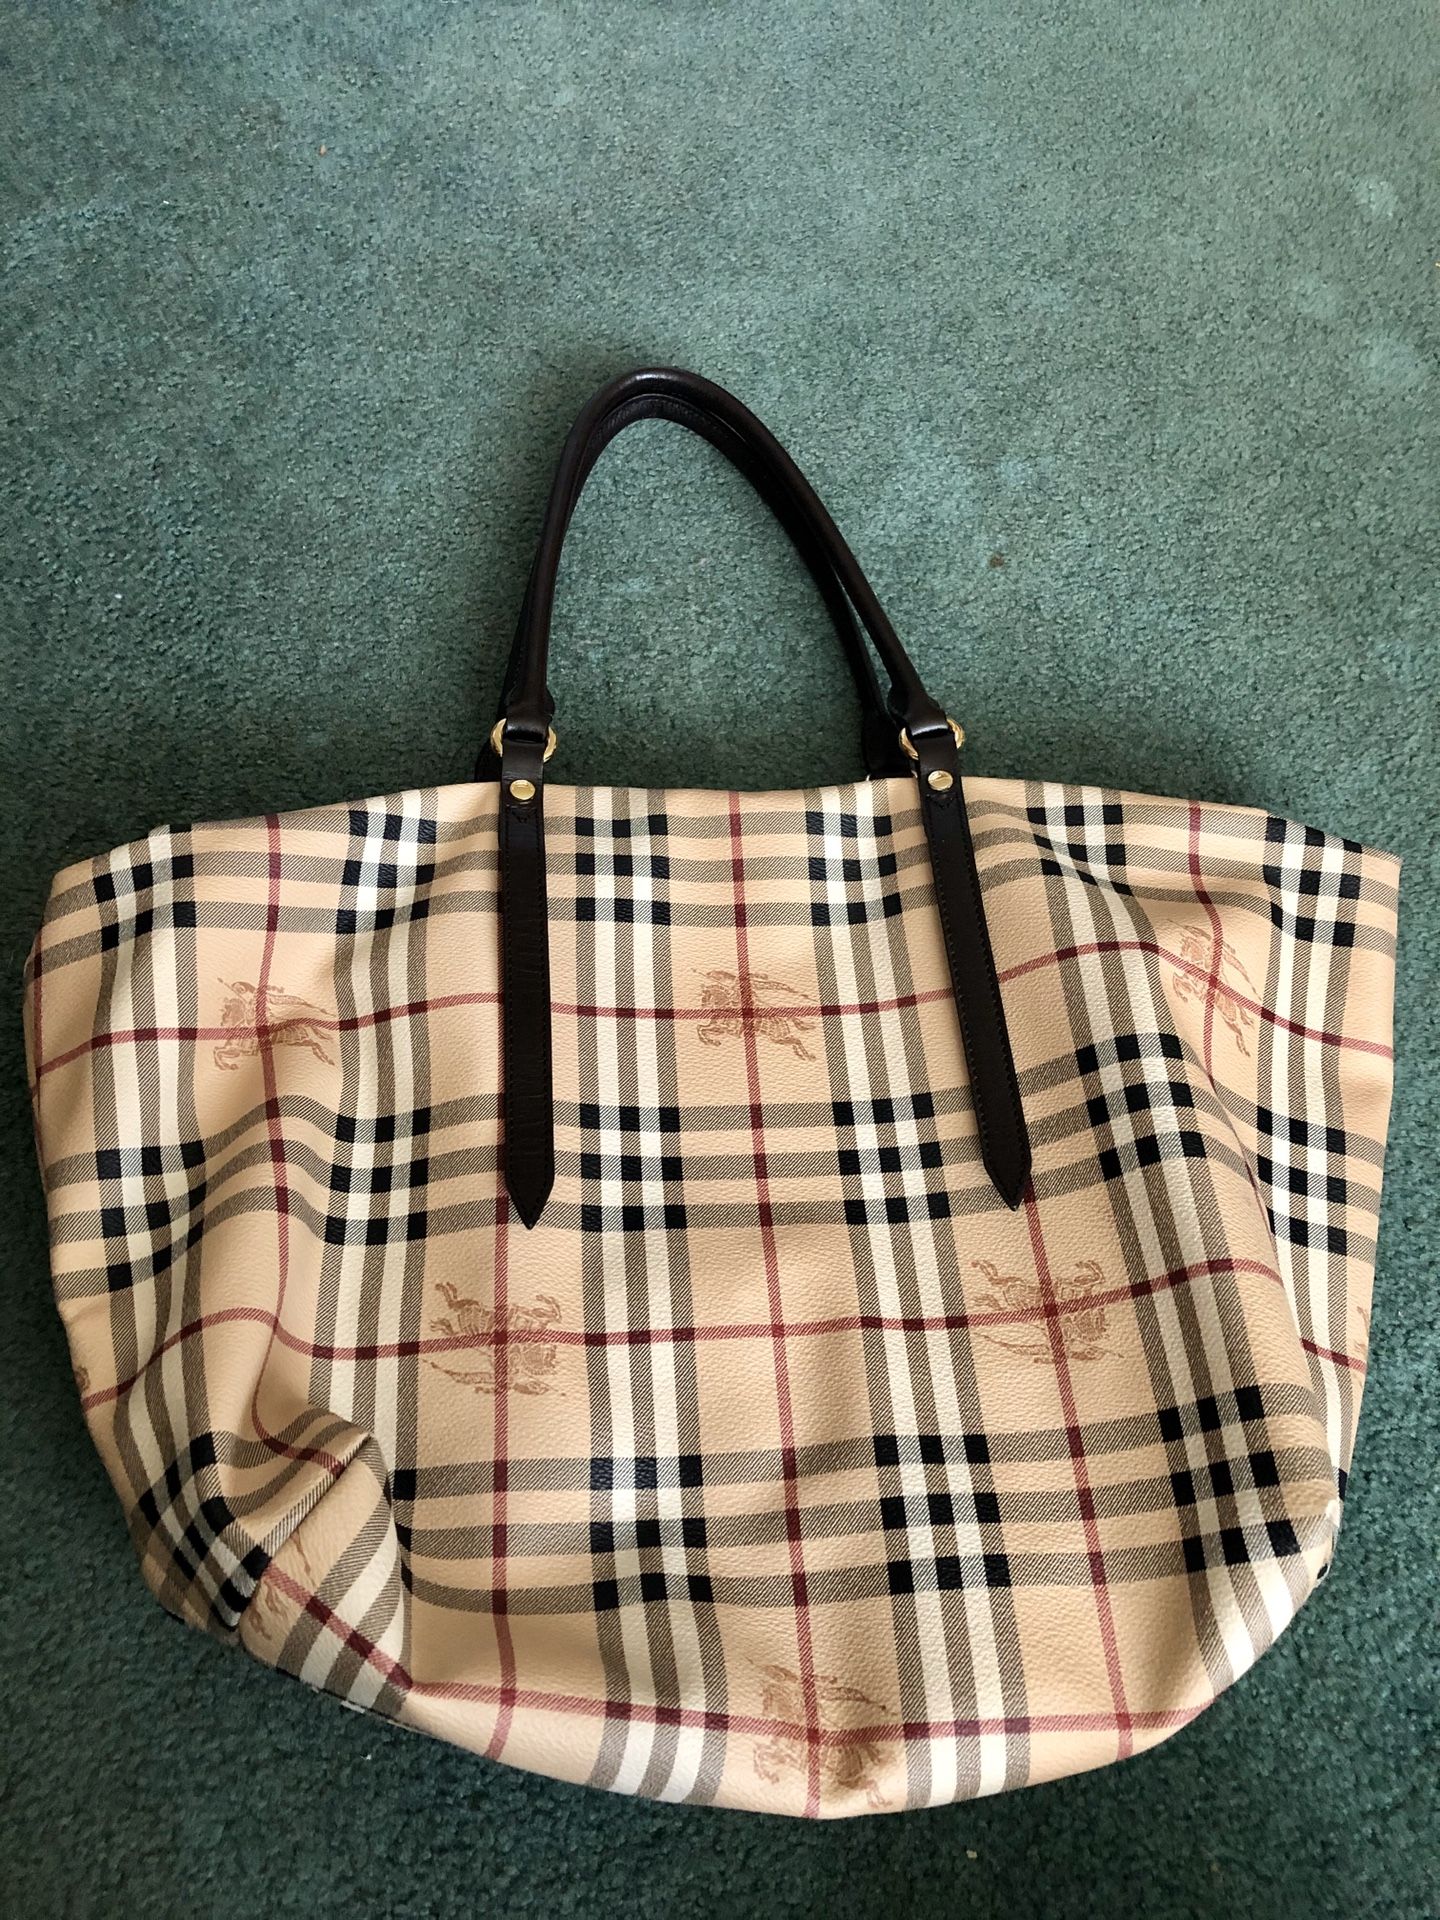 Authentic Burberry leather large shoulder bag